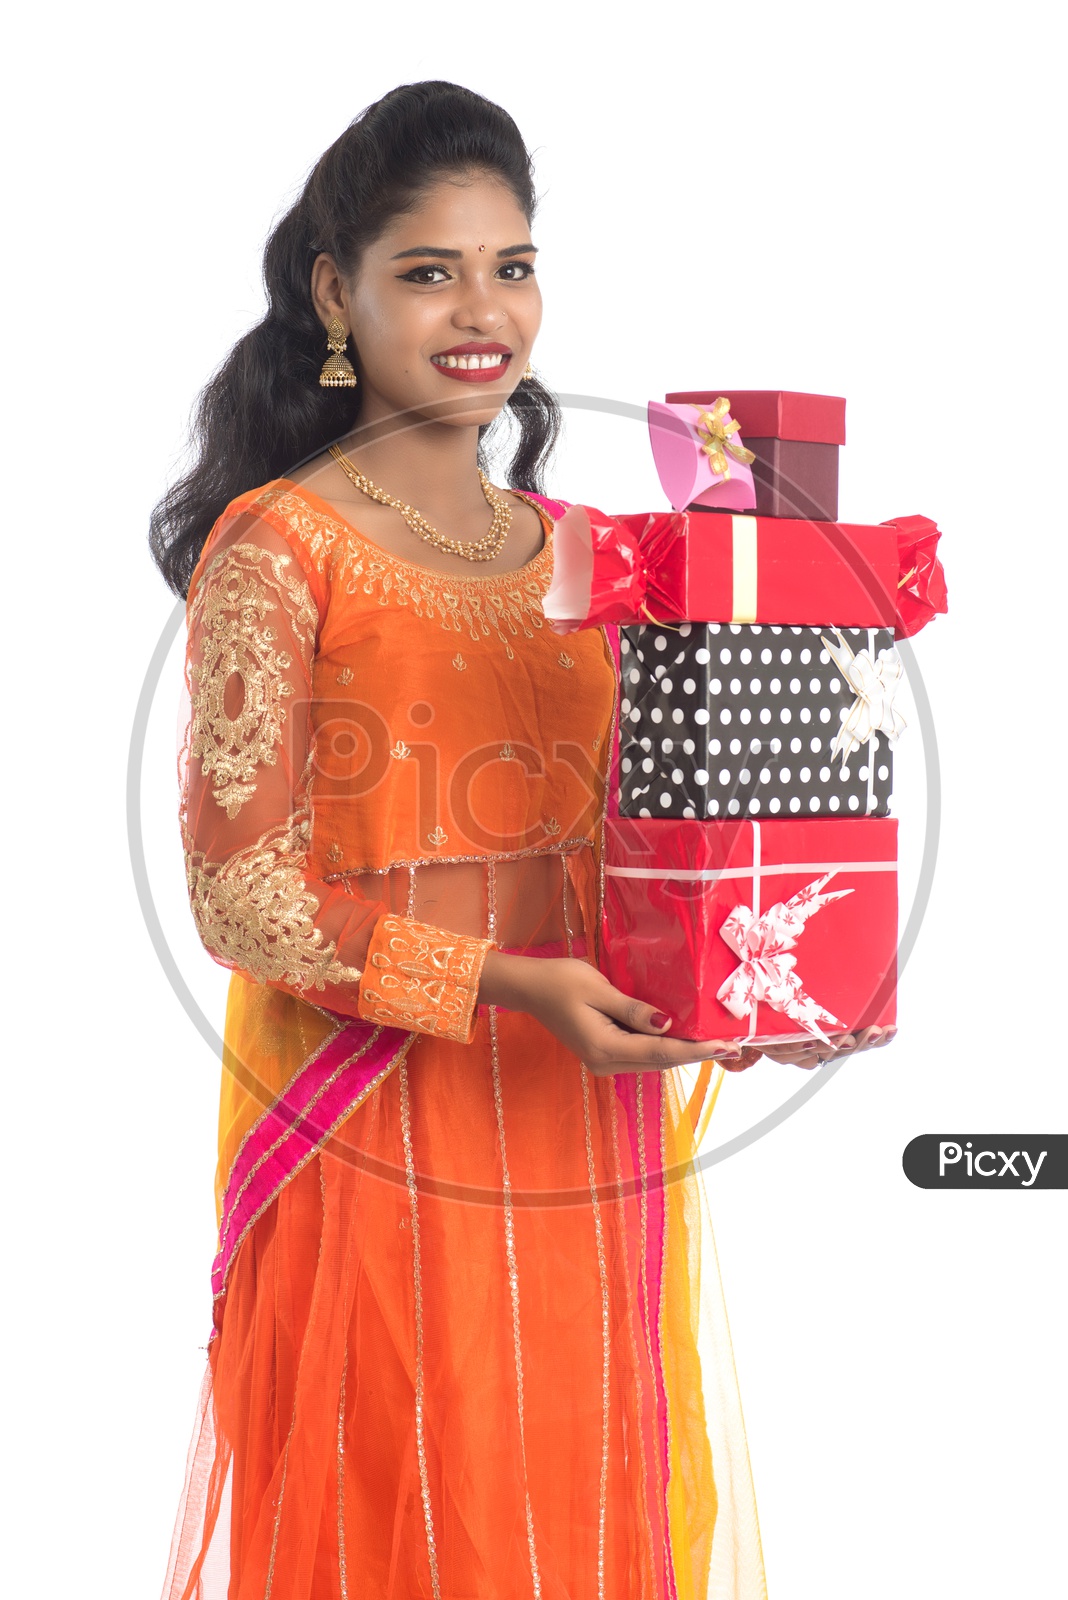 Young Traditional Indian Woman Holding Gift Boxes or Festival Gift Boxes  In hand With a Smile Face On an Isolated White Background